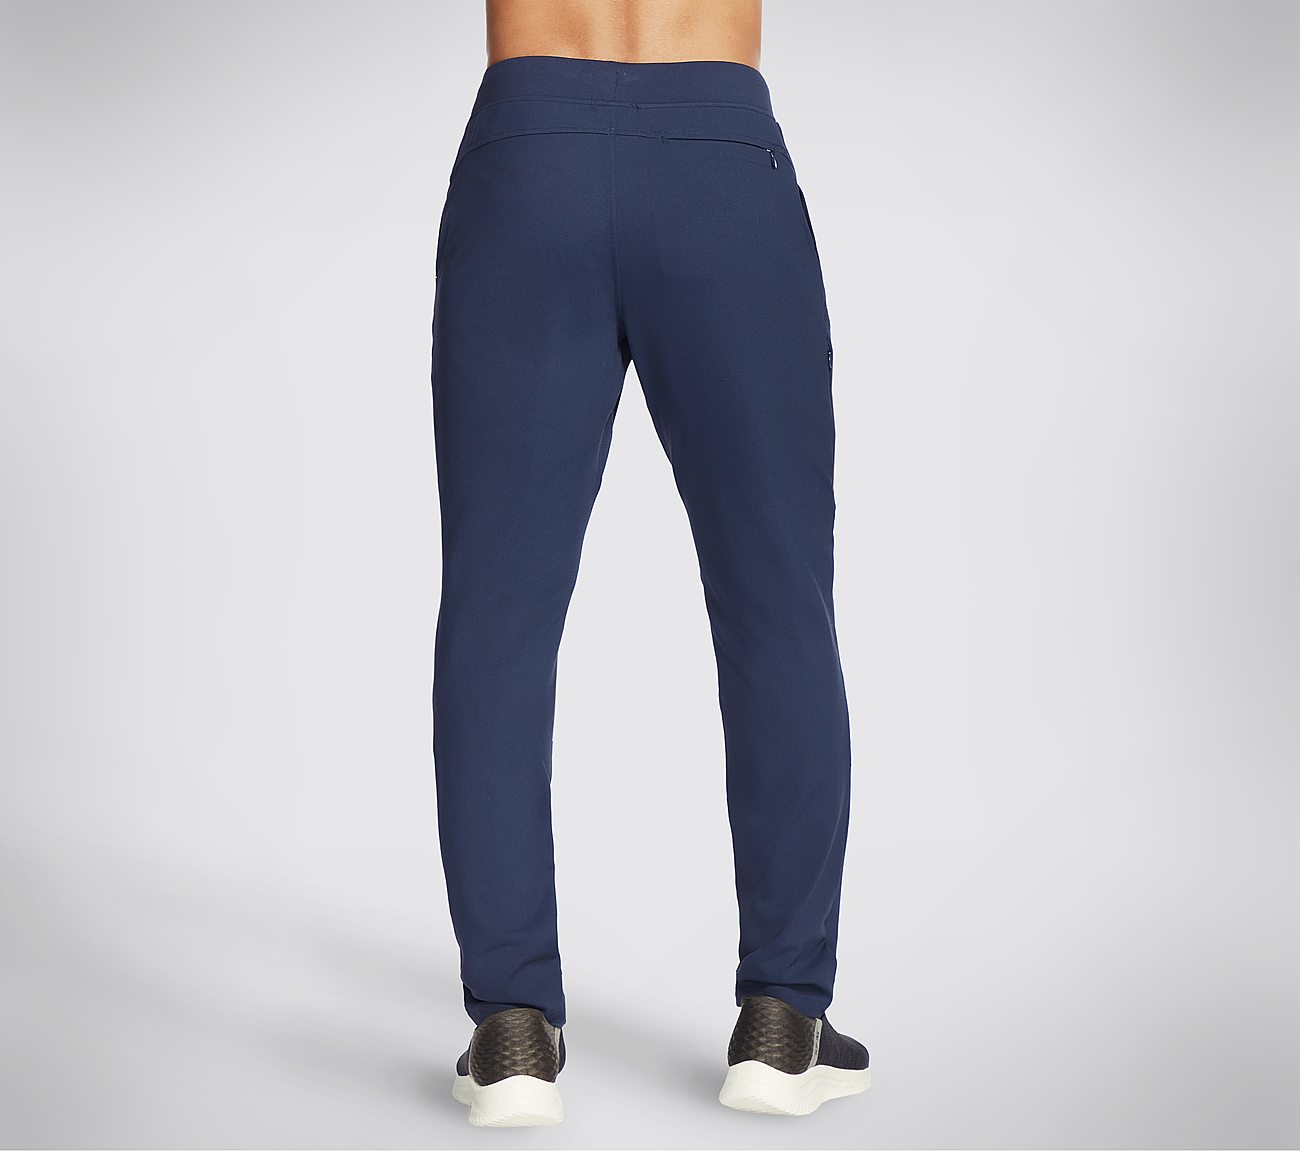 THE GOWALK PANT CONTROLLER, NNNAVY Apparels Top View